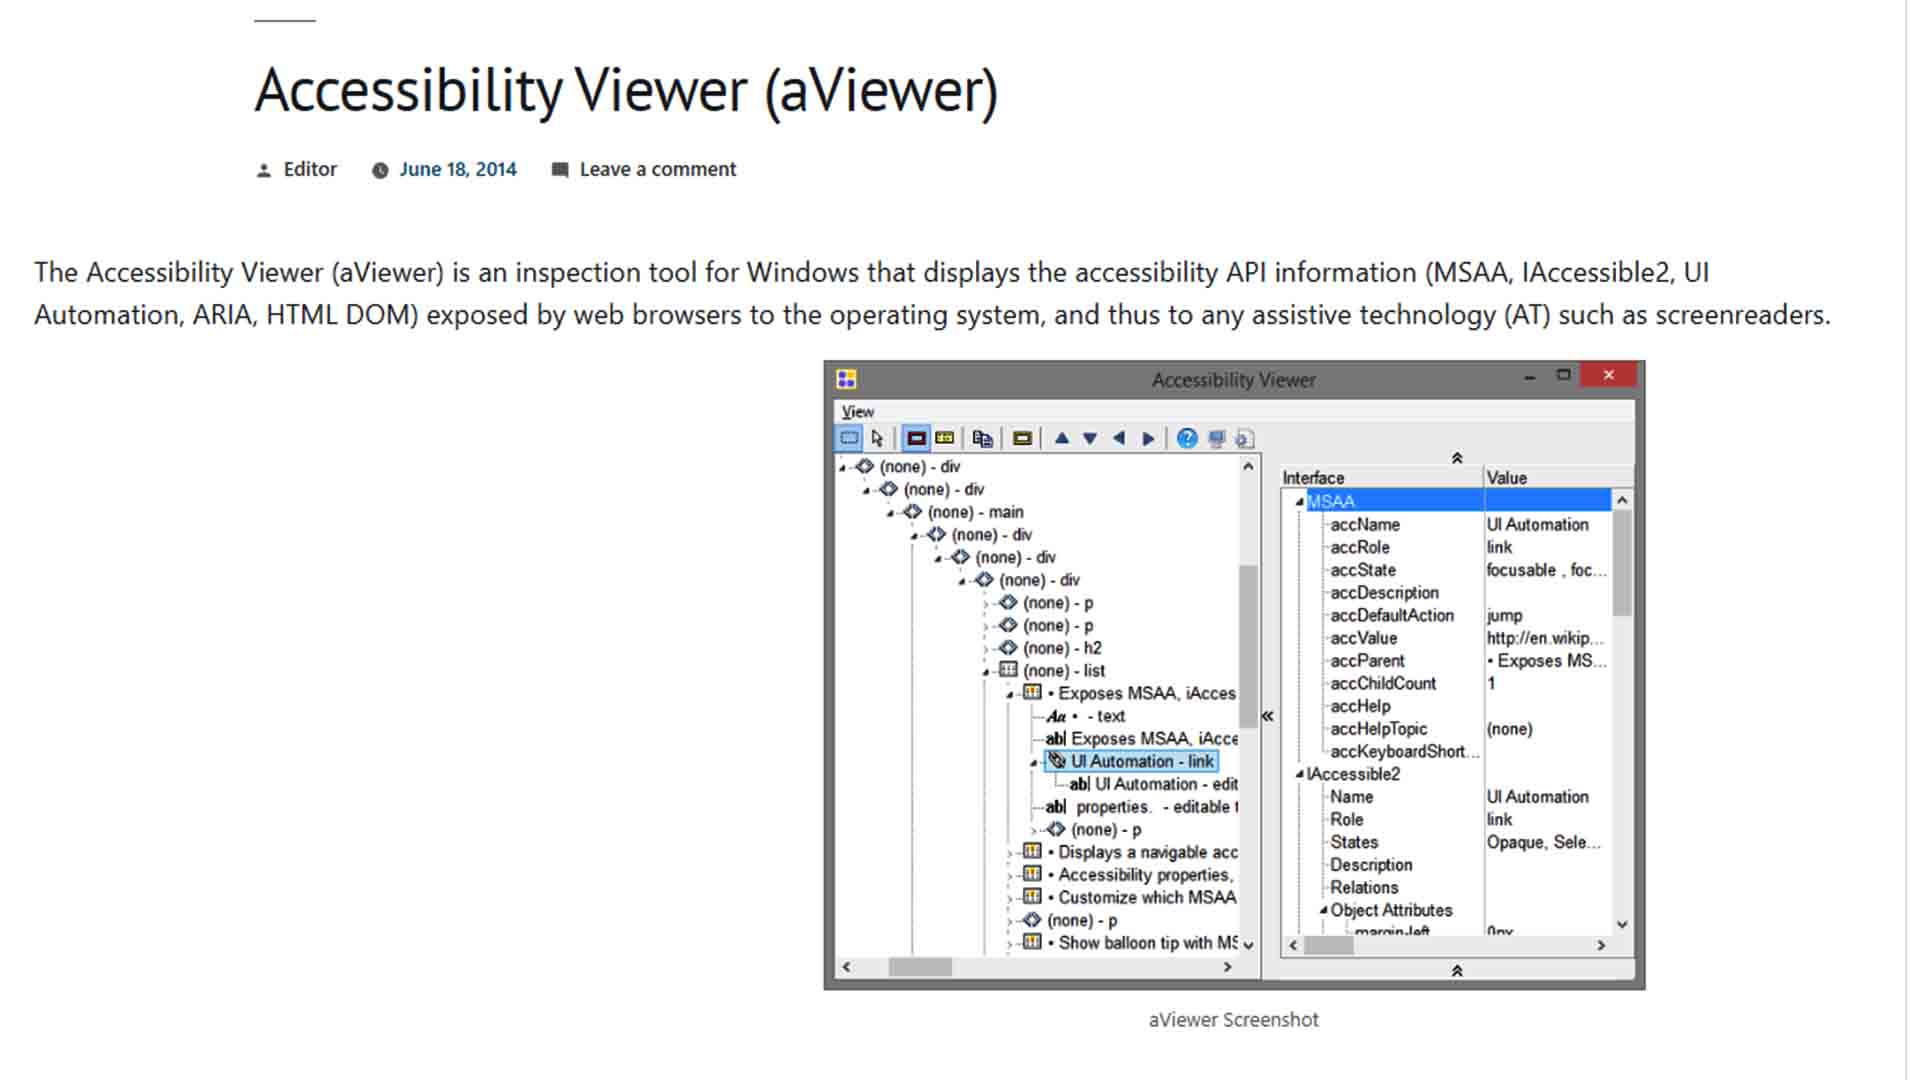 aViewer (Accessibility Viewer)